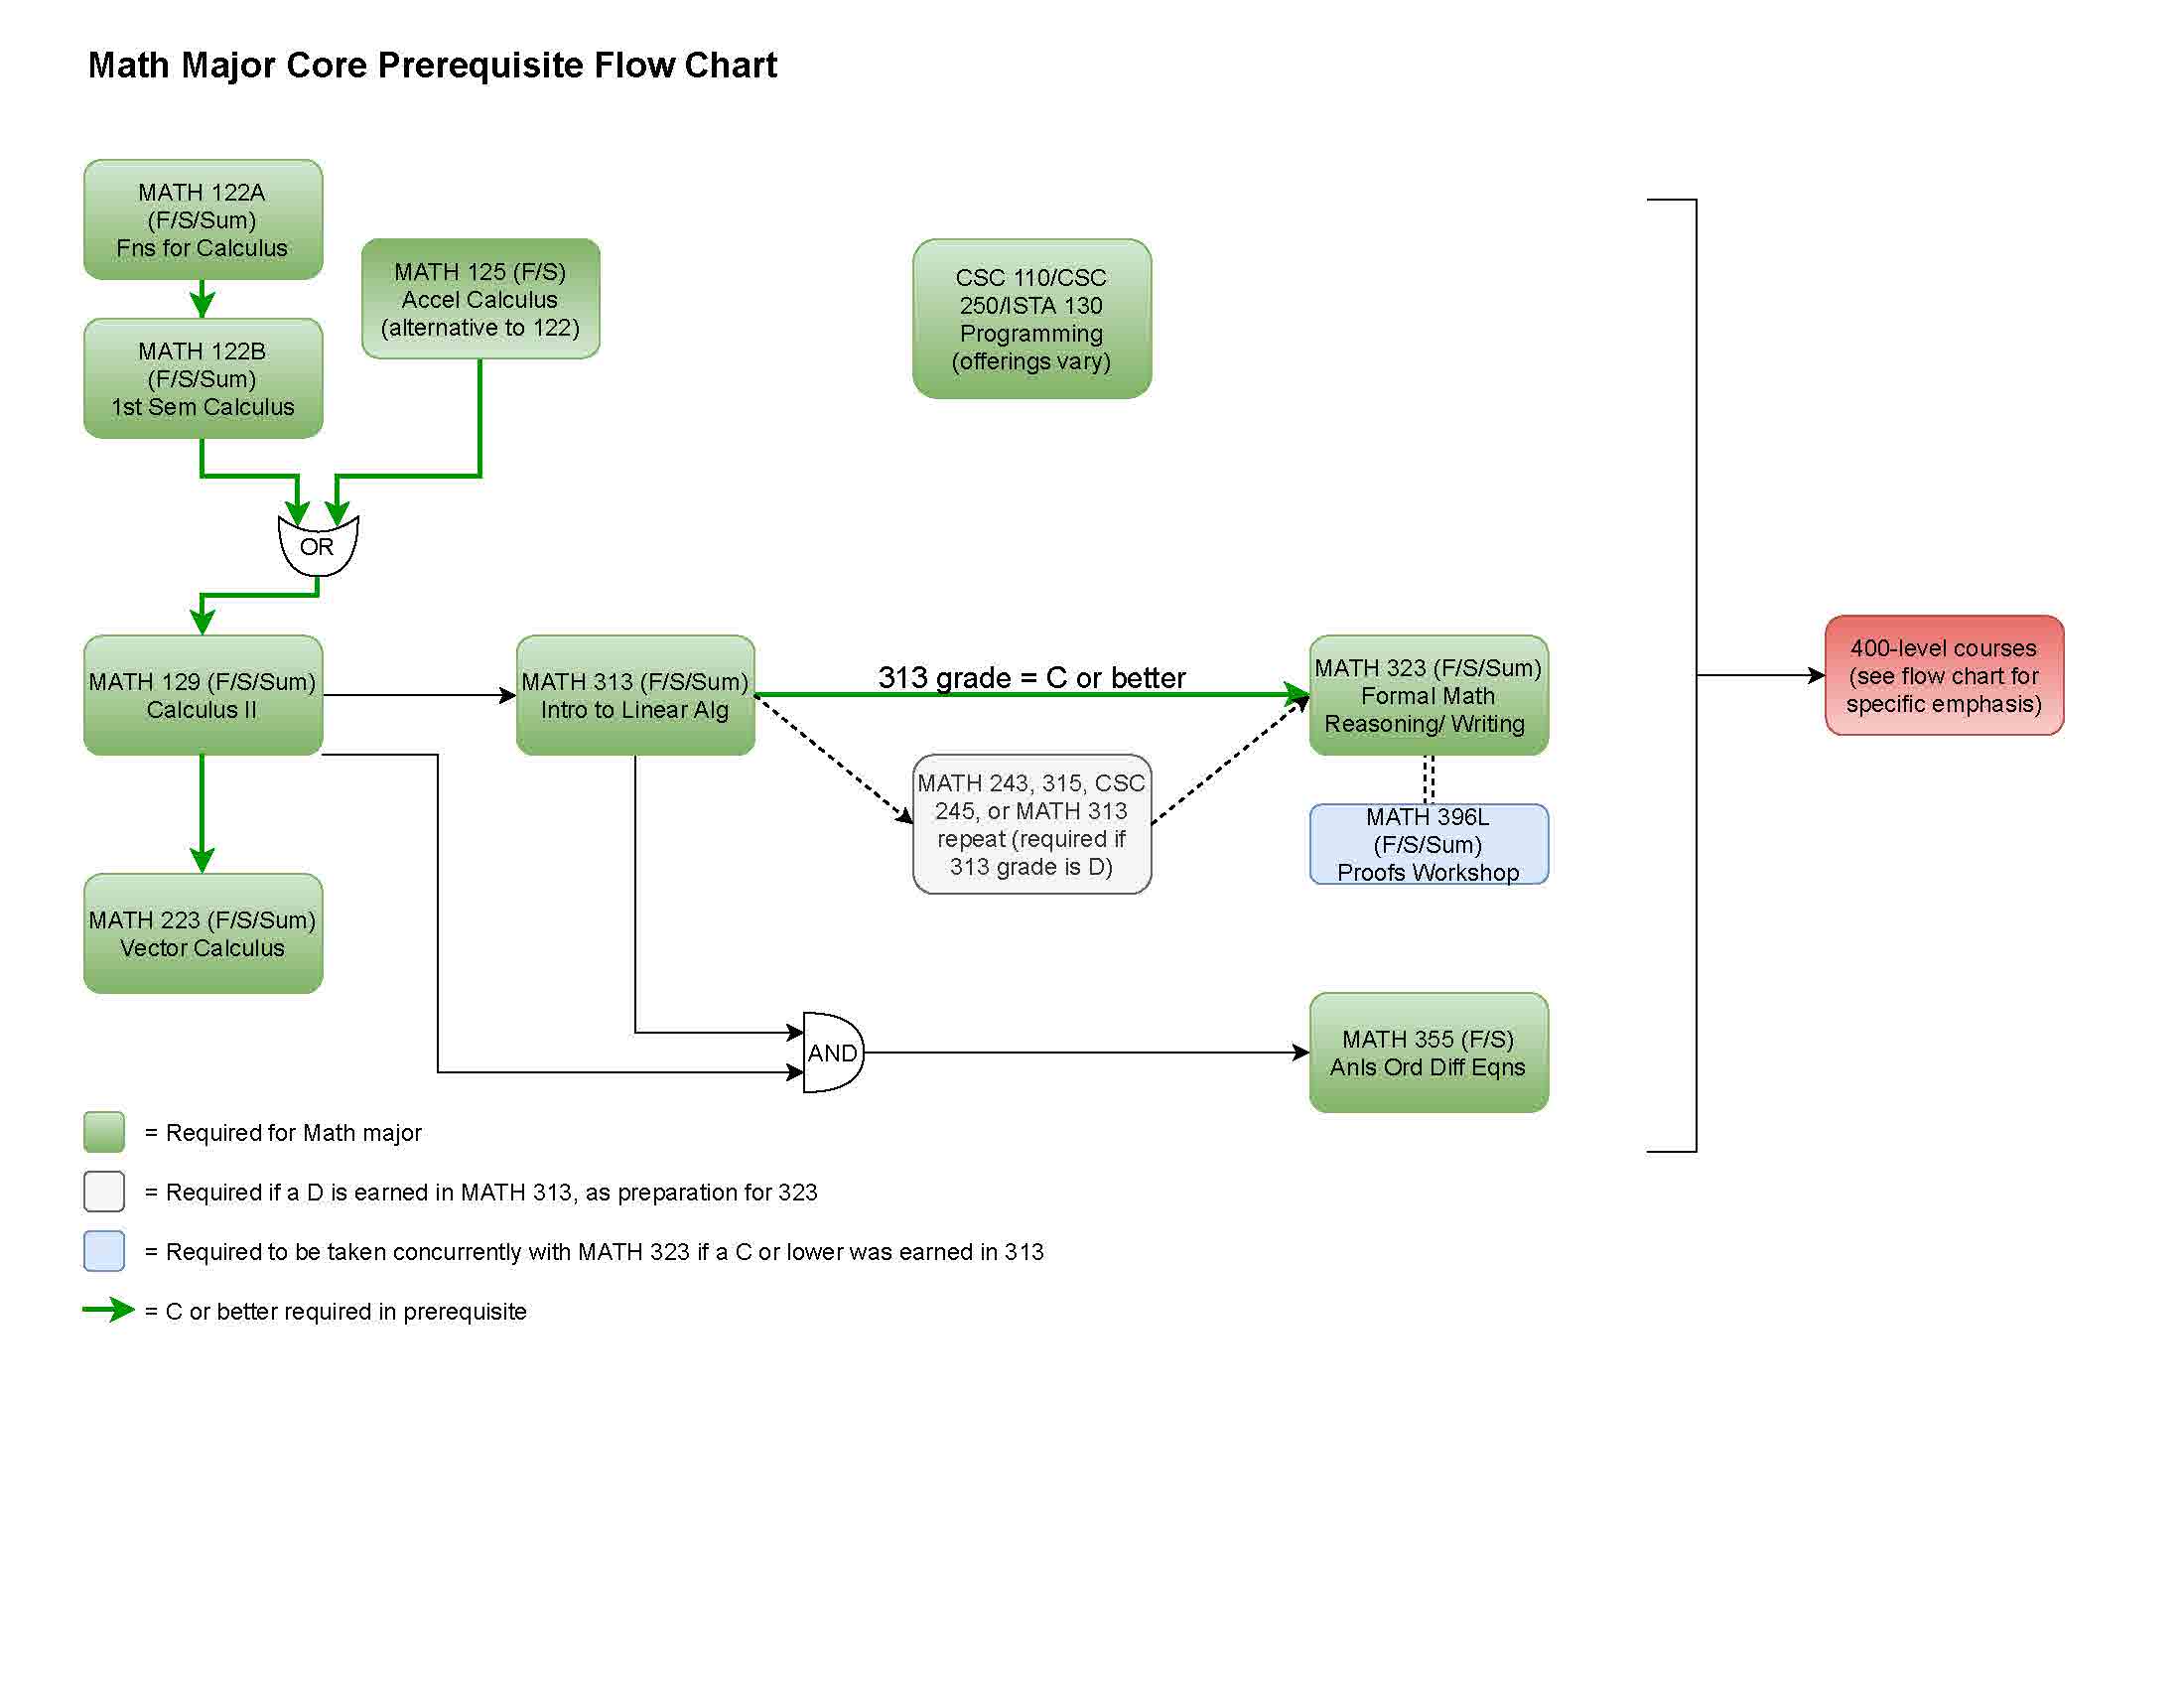 flow chart of core prerequisites (click image for downloadable PDF)